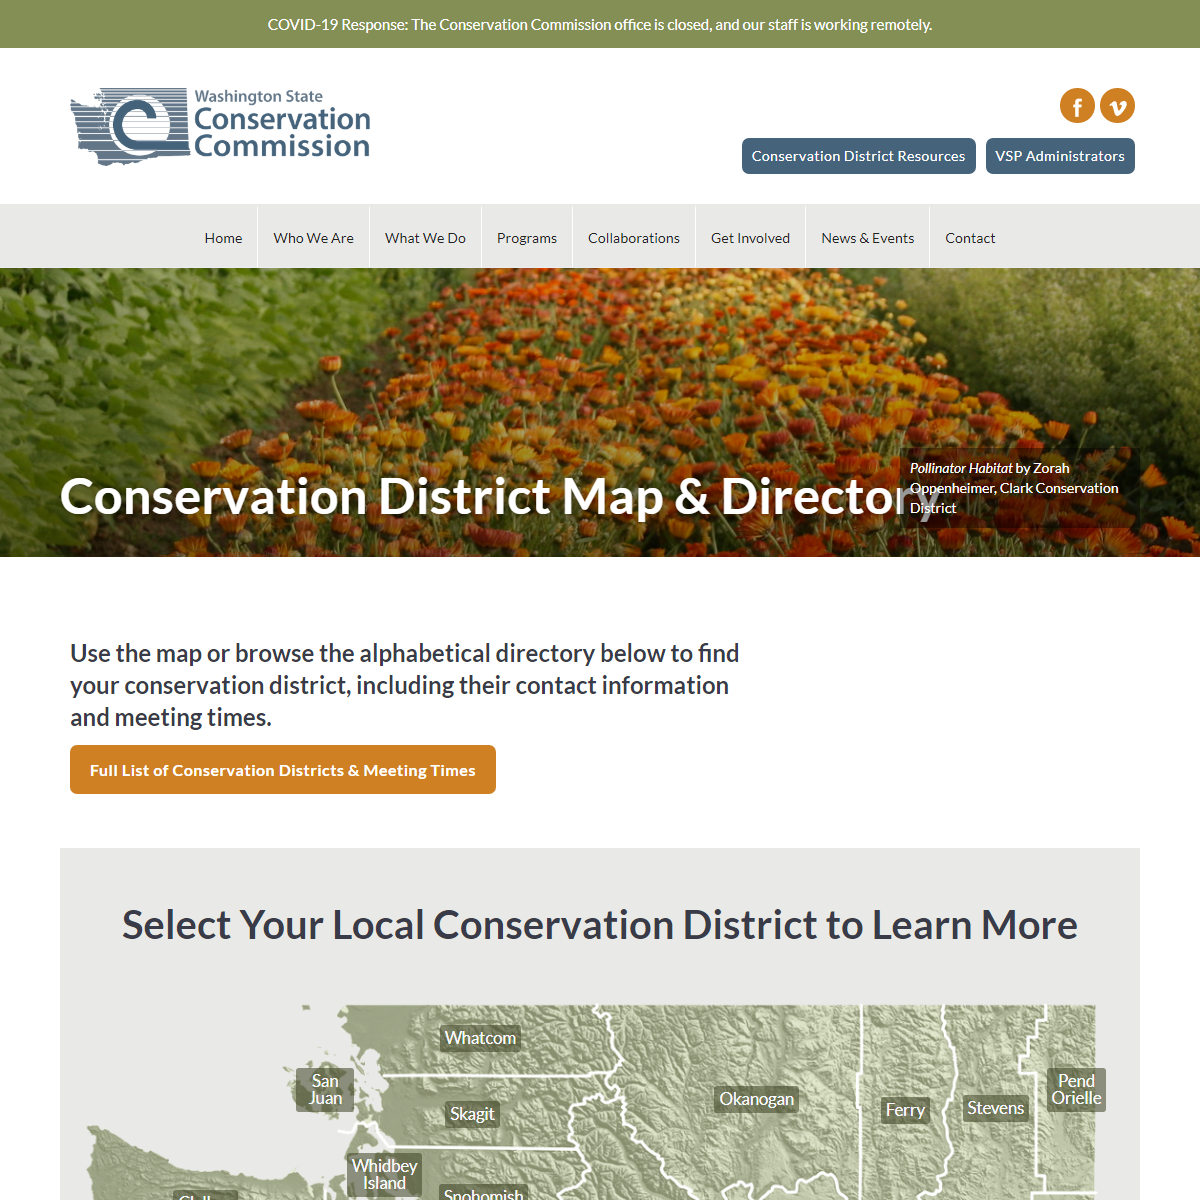 A complete backup of https://www.scc.wa.gov/conservation-district-map